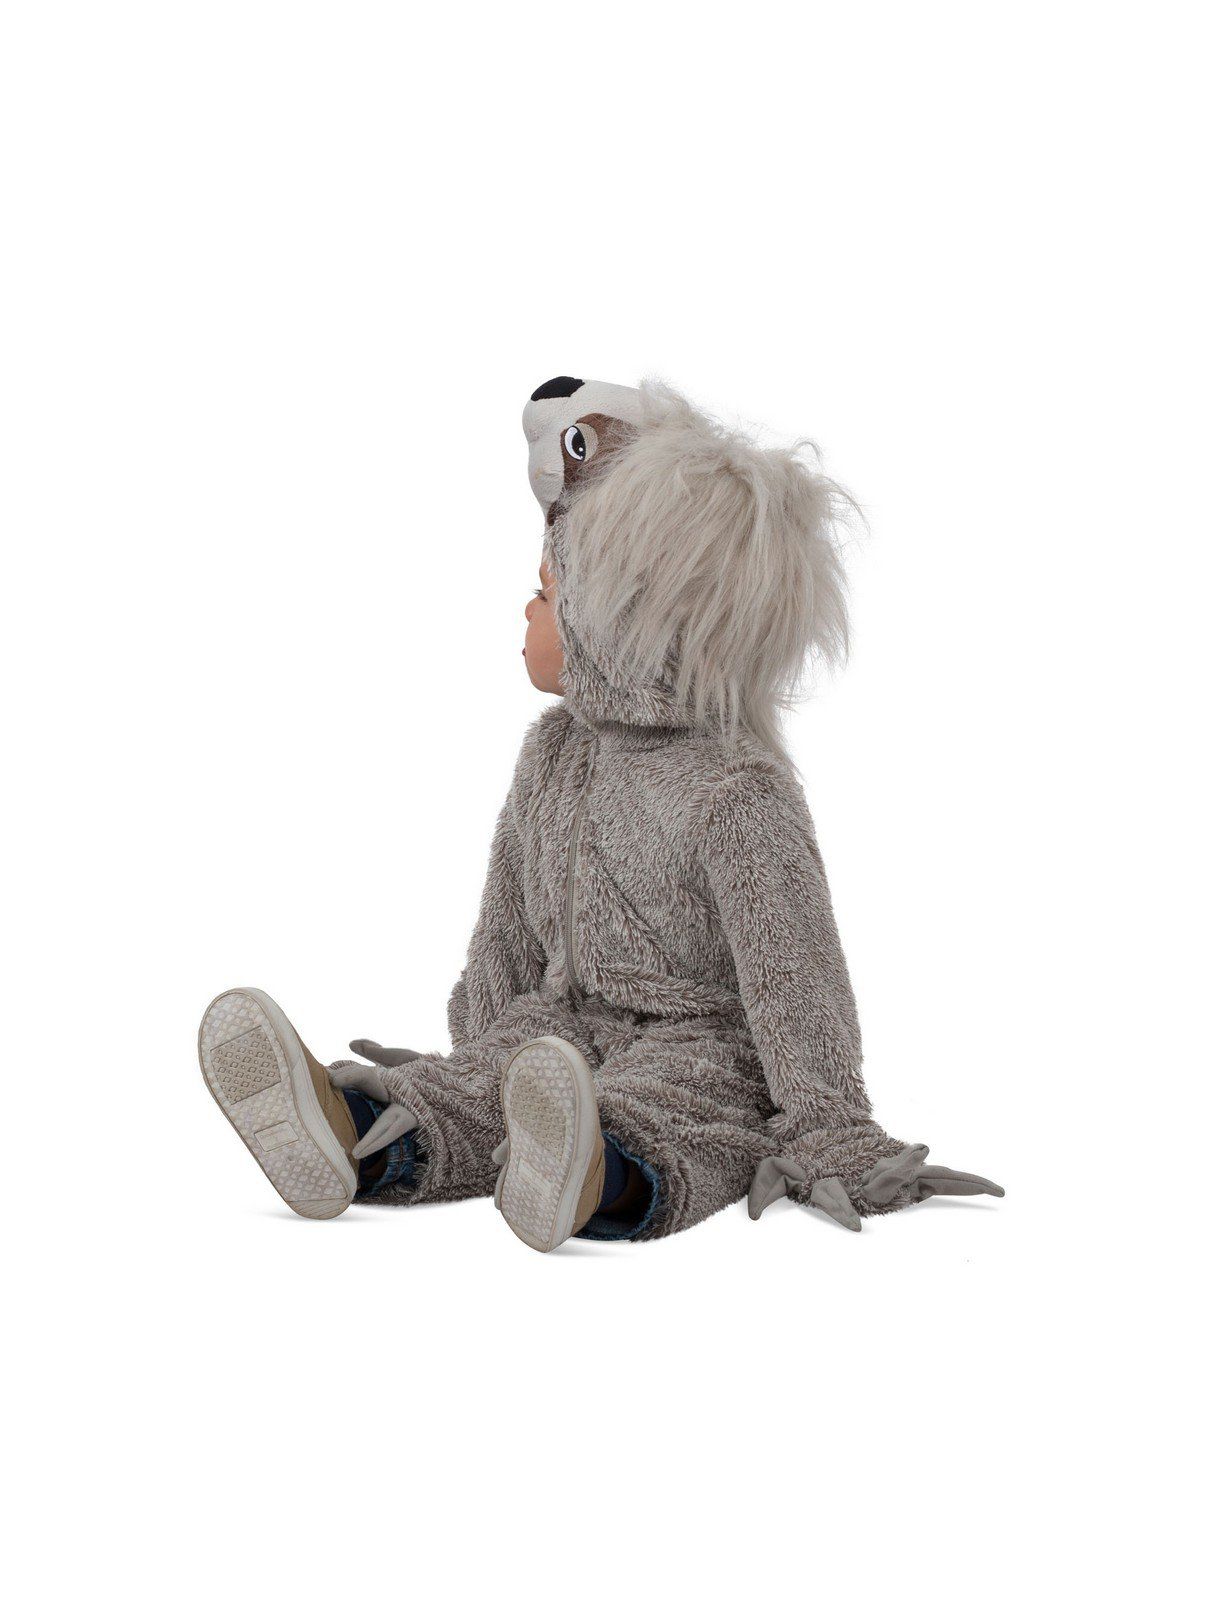 Lil' Swift the Sloth Costume for Babies and Toddlers - costumes.com